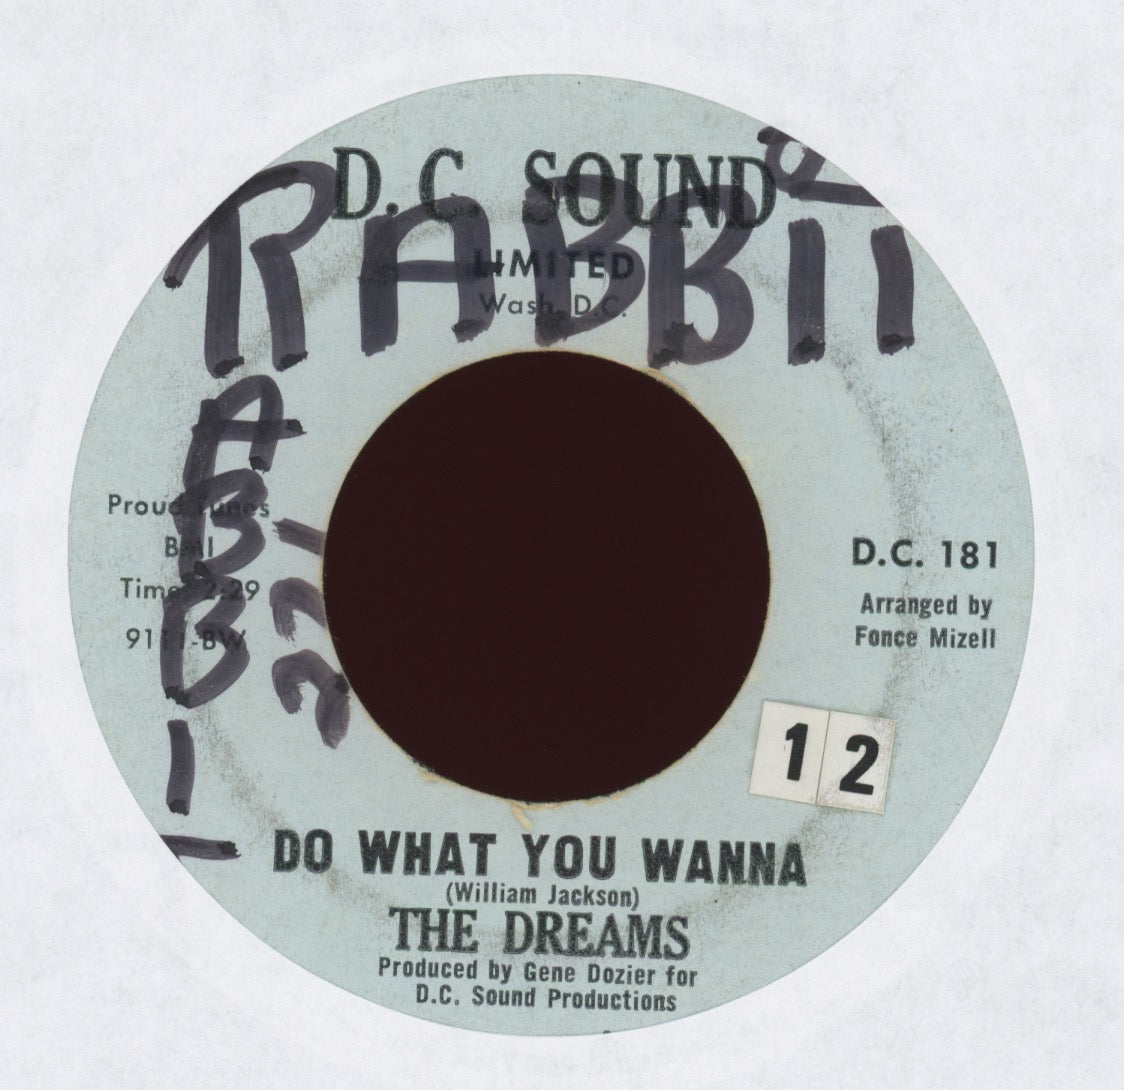 The Dreams - Do What You Wanna on D.C. Sound